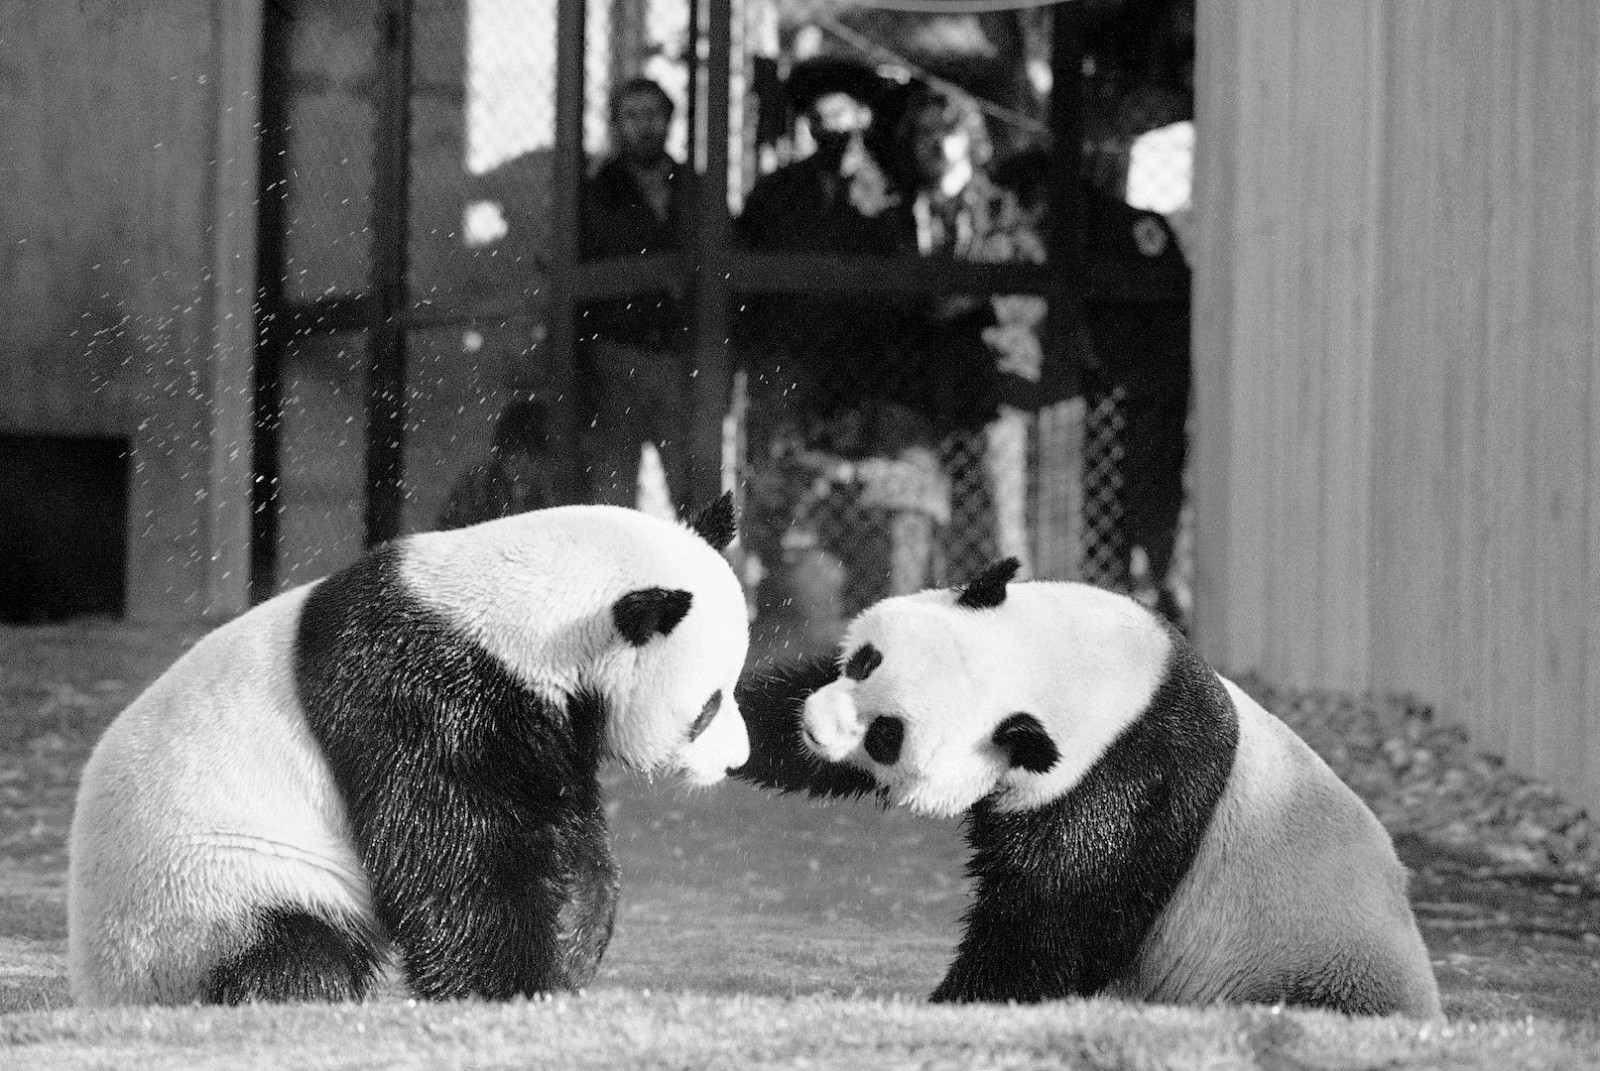 Giant pandas, Ling Ling and Xing Xing, play in their yard in the National Zoo in Washington D.C., the U.S., April 20, 1974. /CFP